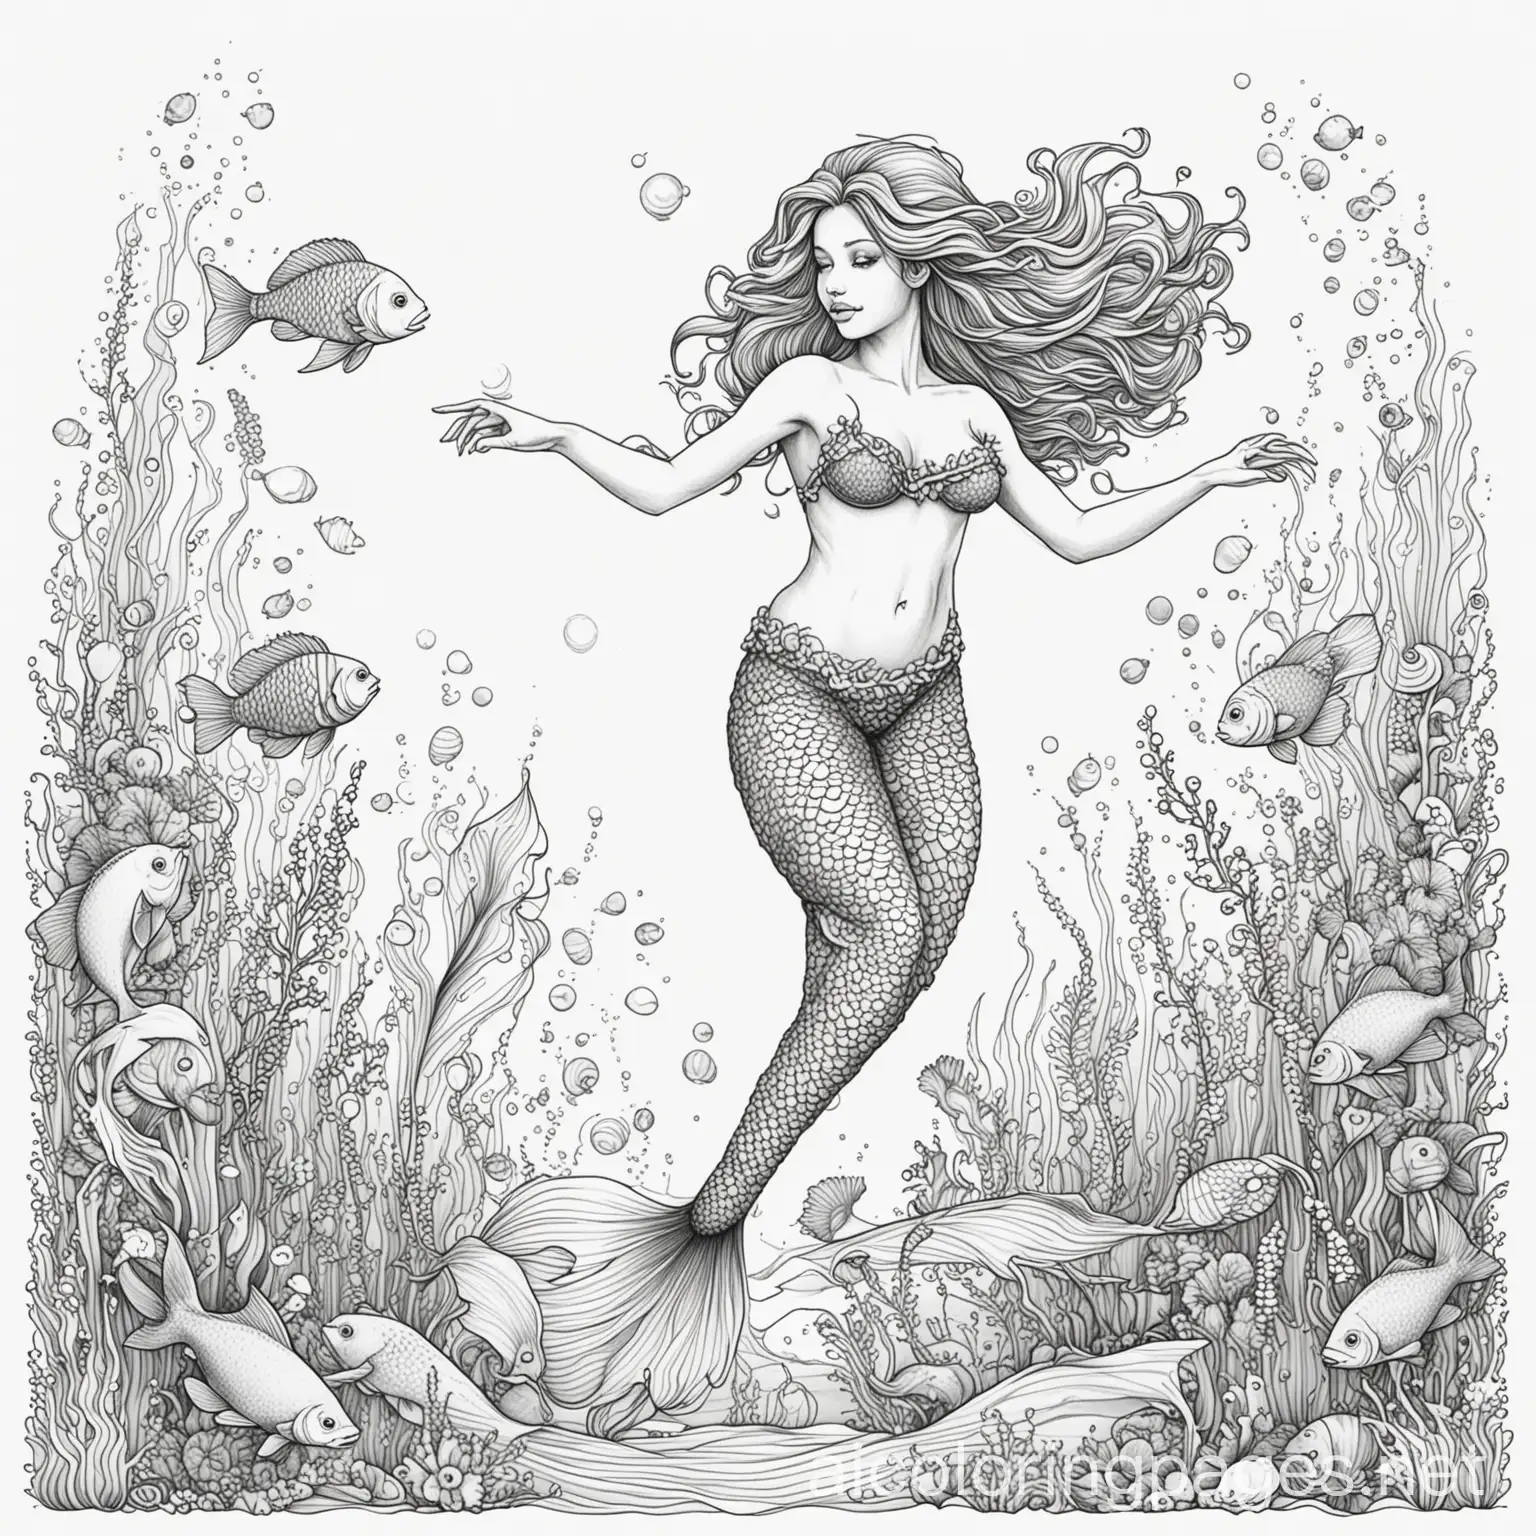 Mermaid-Dancing-in-Ocean-with-Colorful-Fish-Coloring-Page